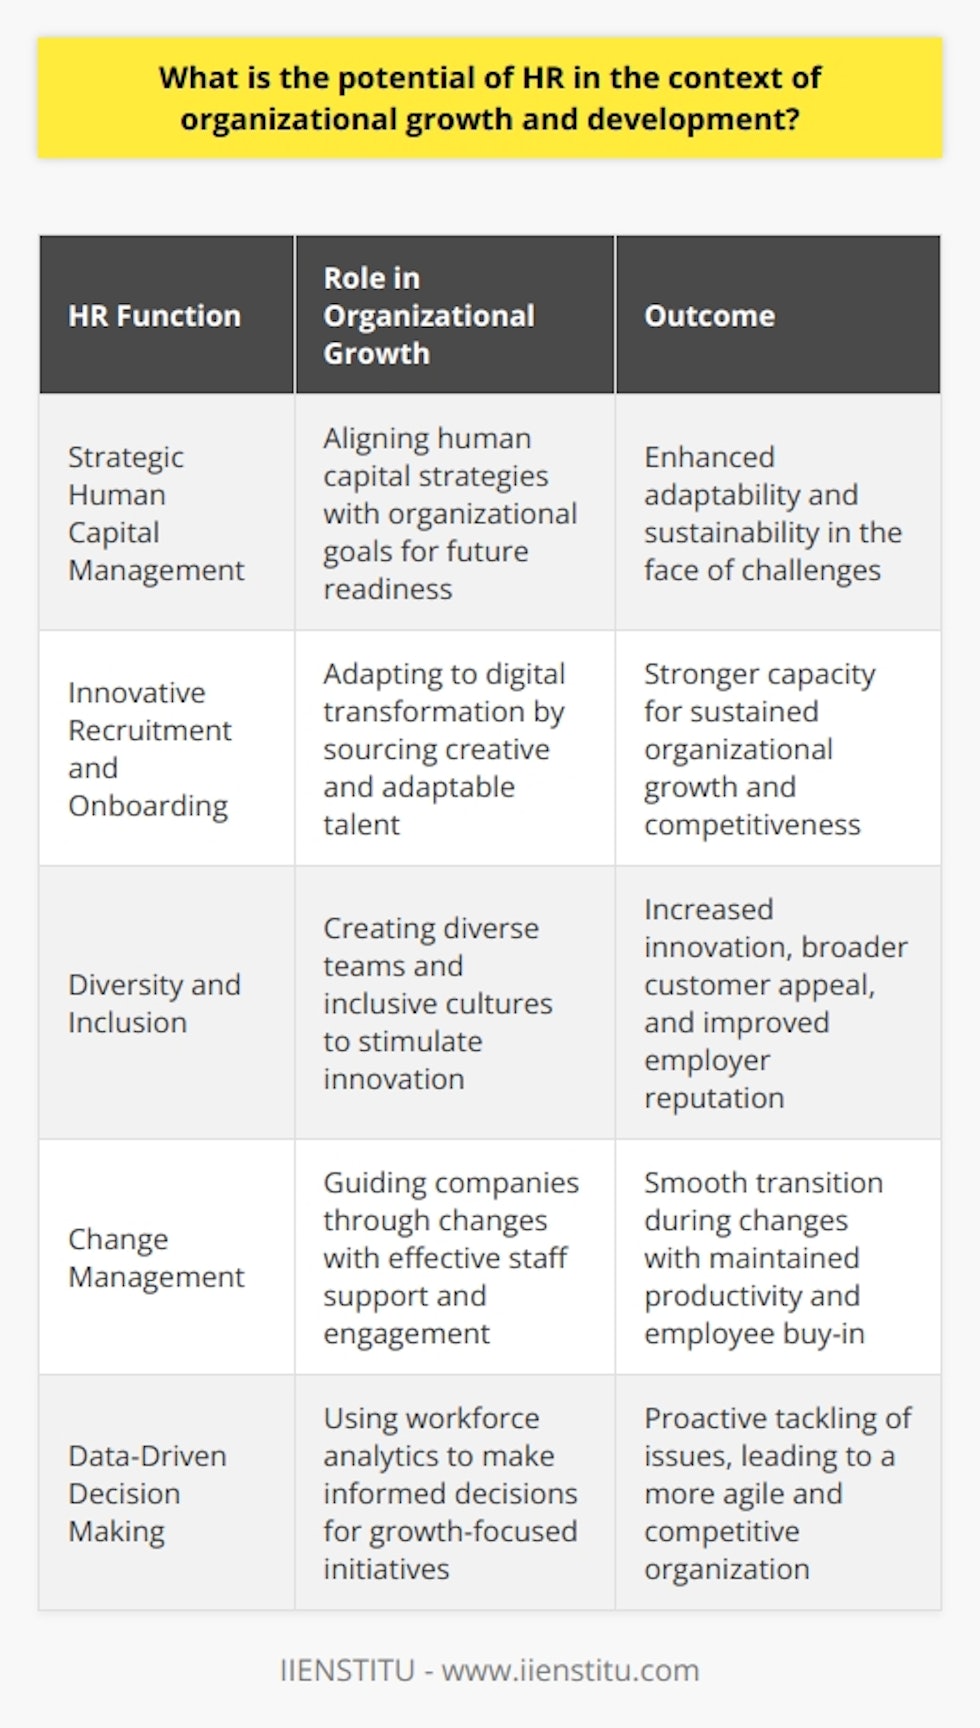 Human Resources (HR) is often viewed as a primarily administrative function within an organization, focusing on tasks such as recruitment, payroll, and compliance. However, the potential of HR reaches far beyond these tactical roles, impacting organizational growth and development in profound ways.Strategic Human Capital ManagementHR is integral to strategic human capital management, a discipline that aligns human capital strategies with organizational goals. It requires HR professionals to think strategically about how each HR function contributes to the broader vision. Effective talent management, succession planning, and organizational design are paramount in ensuring that the firm is well-positioned to meet future challenges and capitalize on new opportunities.Innovative Recruitment and OnboardingHR's potential in organizational growth is also evident in its ability to drive innovation in recruitment and onboarding processes. This involves not only identifying candidates with the requisite skills but also those who demonstrate a capacity for creativity and adaptability. In the era of digital transformation and rapid technological advancements, HR professionals are tasked with sourcing talent capable of navigating a volatile business landscape and driving sustained growth.Diversity and InclusionDiversity and inclusion have proven to be significant drivers of organizational success. HR's commitment to creating a diverse workforce and an inclusive work environment can unlock innovation, fuel creativity, and appeal to a broader customer base. By actively working to eliminate biases and barriers within the hiring process and company culture, HR enhances the company's reputation, making it an employer of choice for top talent.Change ManagementThe potential of HR is equally impactful in guiding organizations through periods of change. Be it mergers, acquisitions, restructurings, or pivots, HR leads change management initiatives, helping employees to navigate the change curve effectively. This support mitigates resistance, fosters buy-in, and maintains productivity, which is crucial in times of organizational transformation.Data-Driven Decision MakingFinally, in the age of big data, HR's potential lies in its ability to gather and analyze workforce analytics. This data is invaluable in making informed decisions that foster growth. By identifying trends in employee turnover, productivity, and satisfaction, HR practitioners can implement strategies to address issues before they escalate, ensuring the organization remains agile and competitive.HR's potential, when fully realized, contributes significantly to the growth and development of organizations. HR professionals, by addressing the multifaceted aspects of strategic planning, talent acquisition and retention, employee development, performance management, and cultural enhancement, play a pivotal role in ensuring that their organizations are well-equipped for future success.